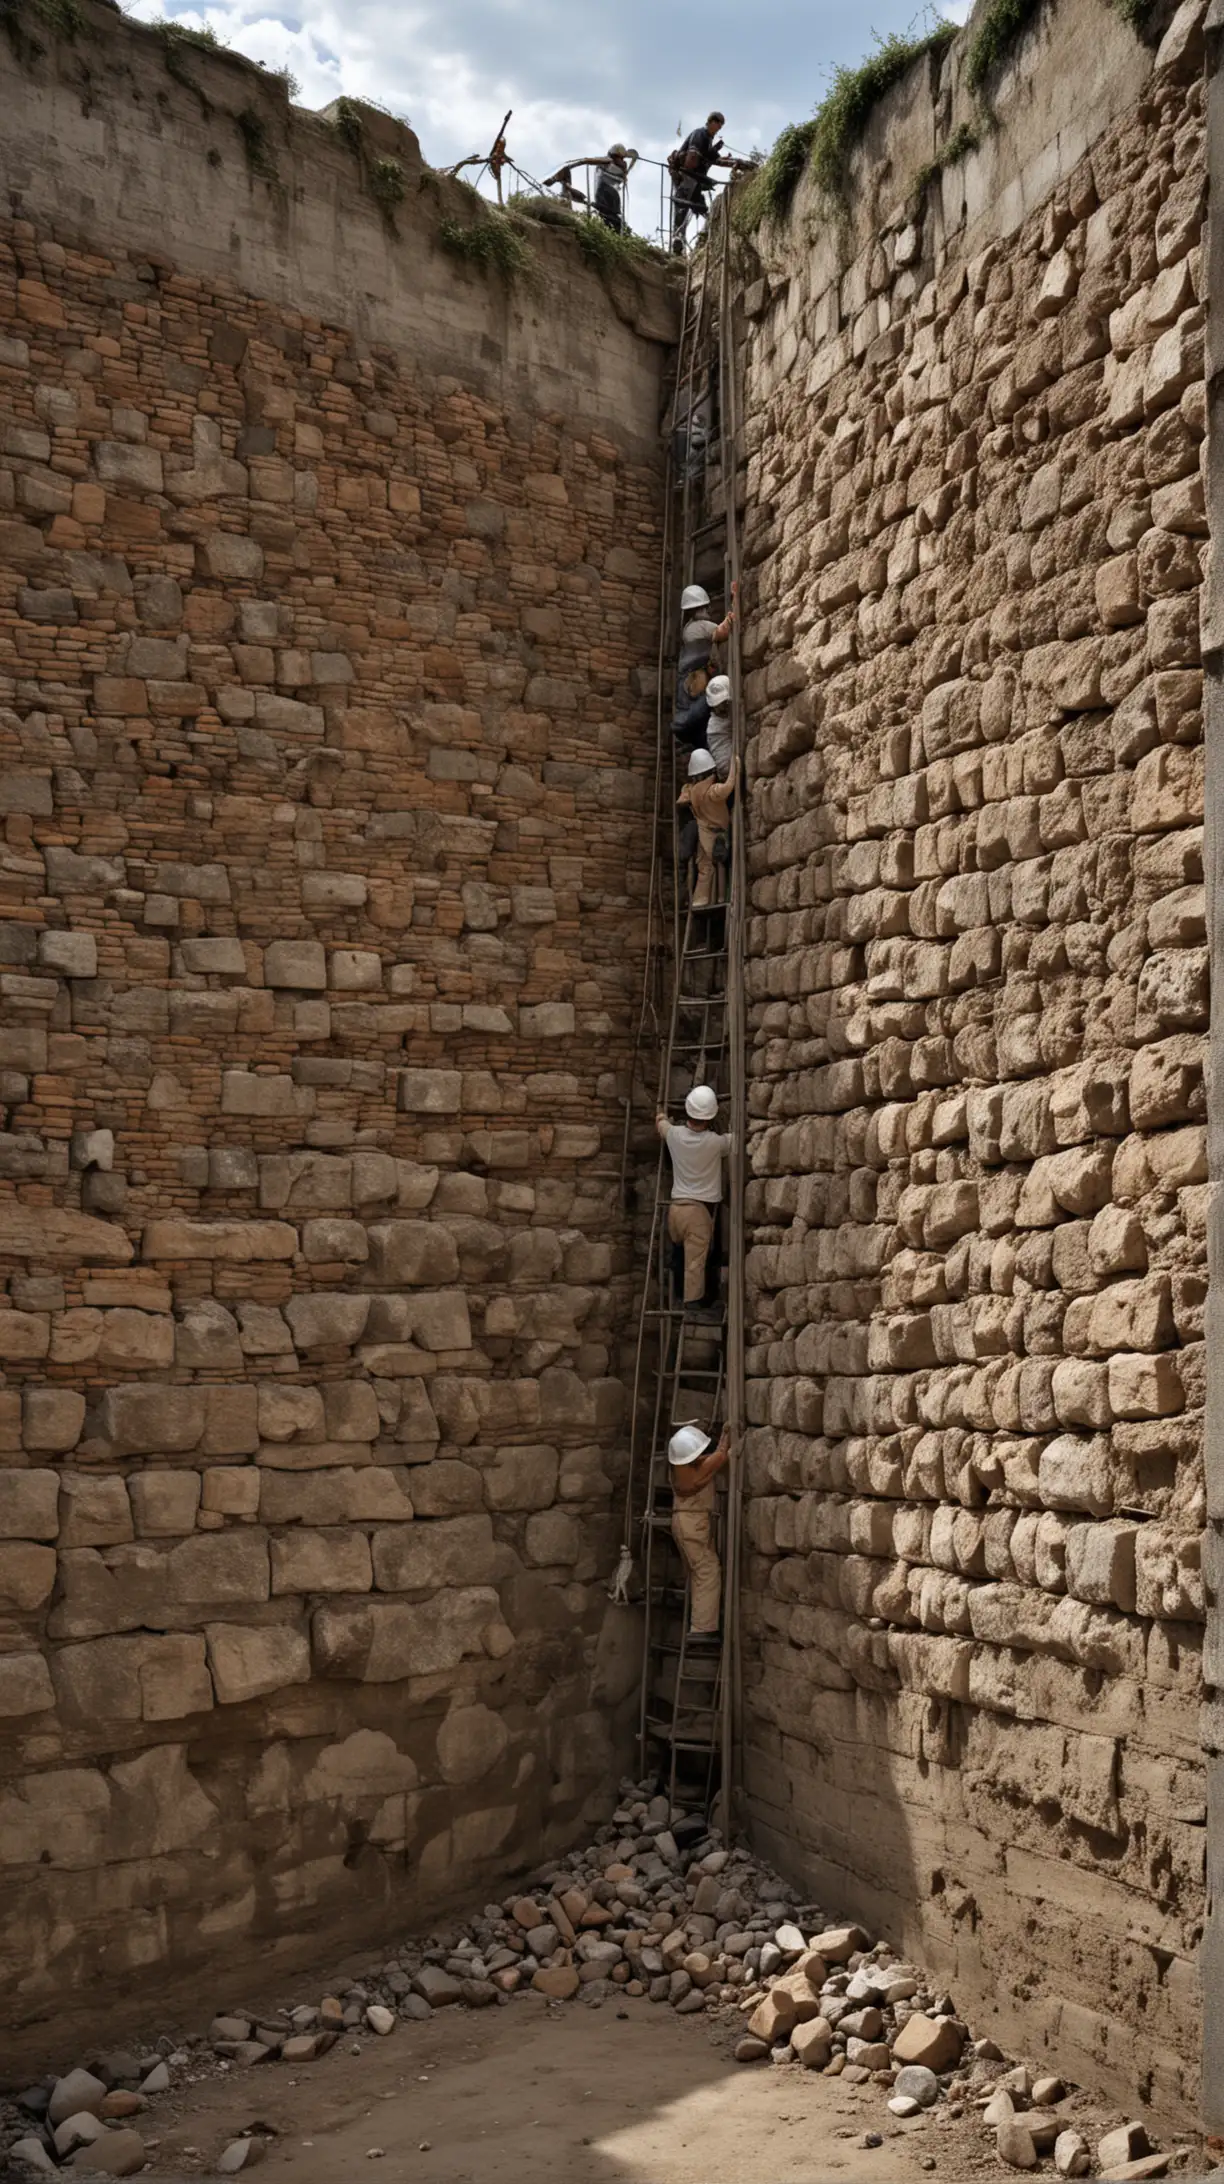 Use of human bodies: According to some sources, approximately millions of workers were buried during the construction of the walls. However, this is not the only strange fact associated with the use of people in the construction process. There are suggestions that in some areas of the walls living people were walled up alive, given that this is a special wall of additional power and protection. Hyper realistic